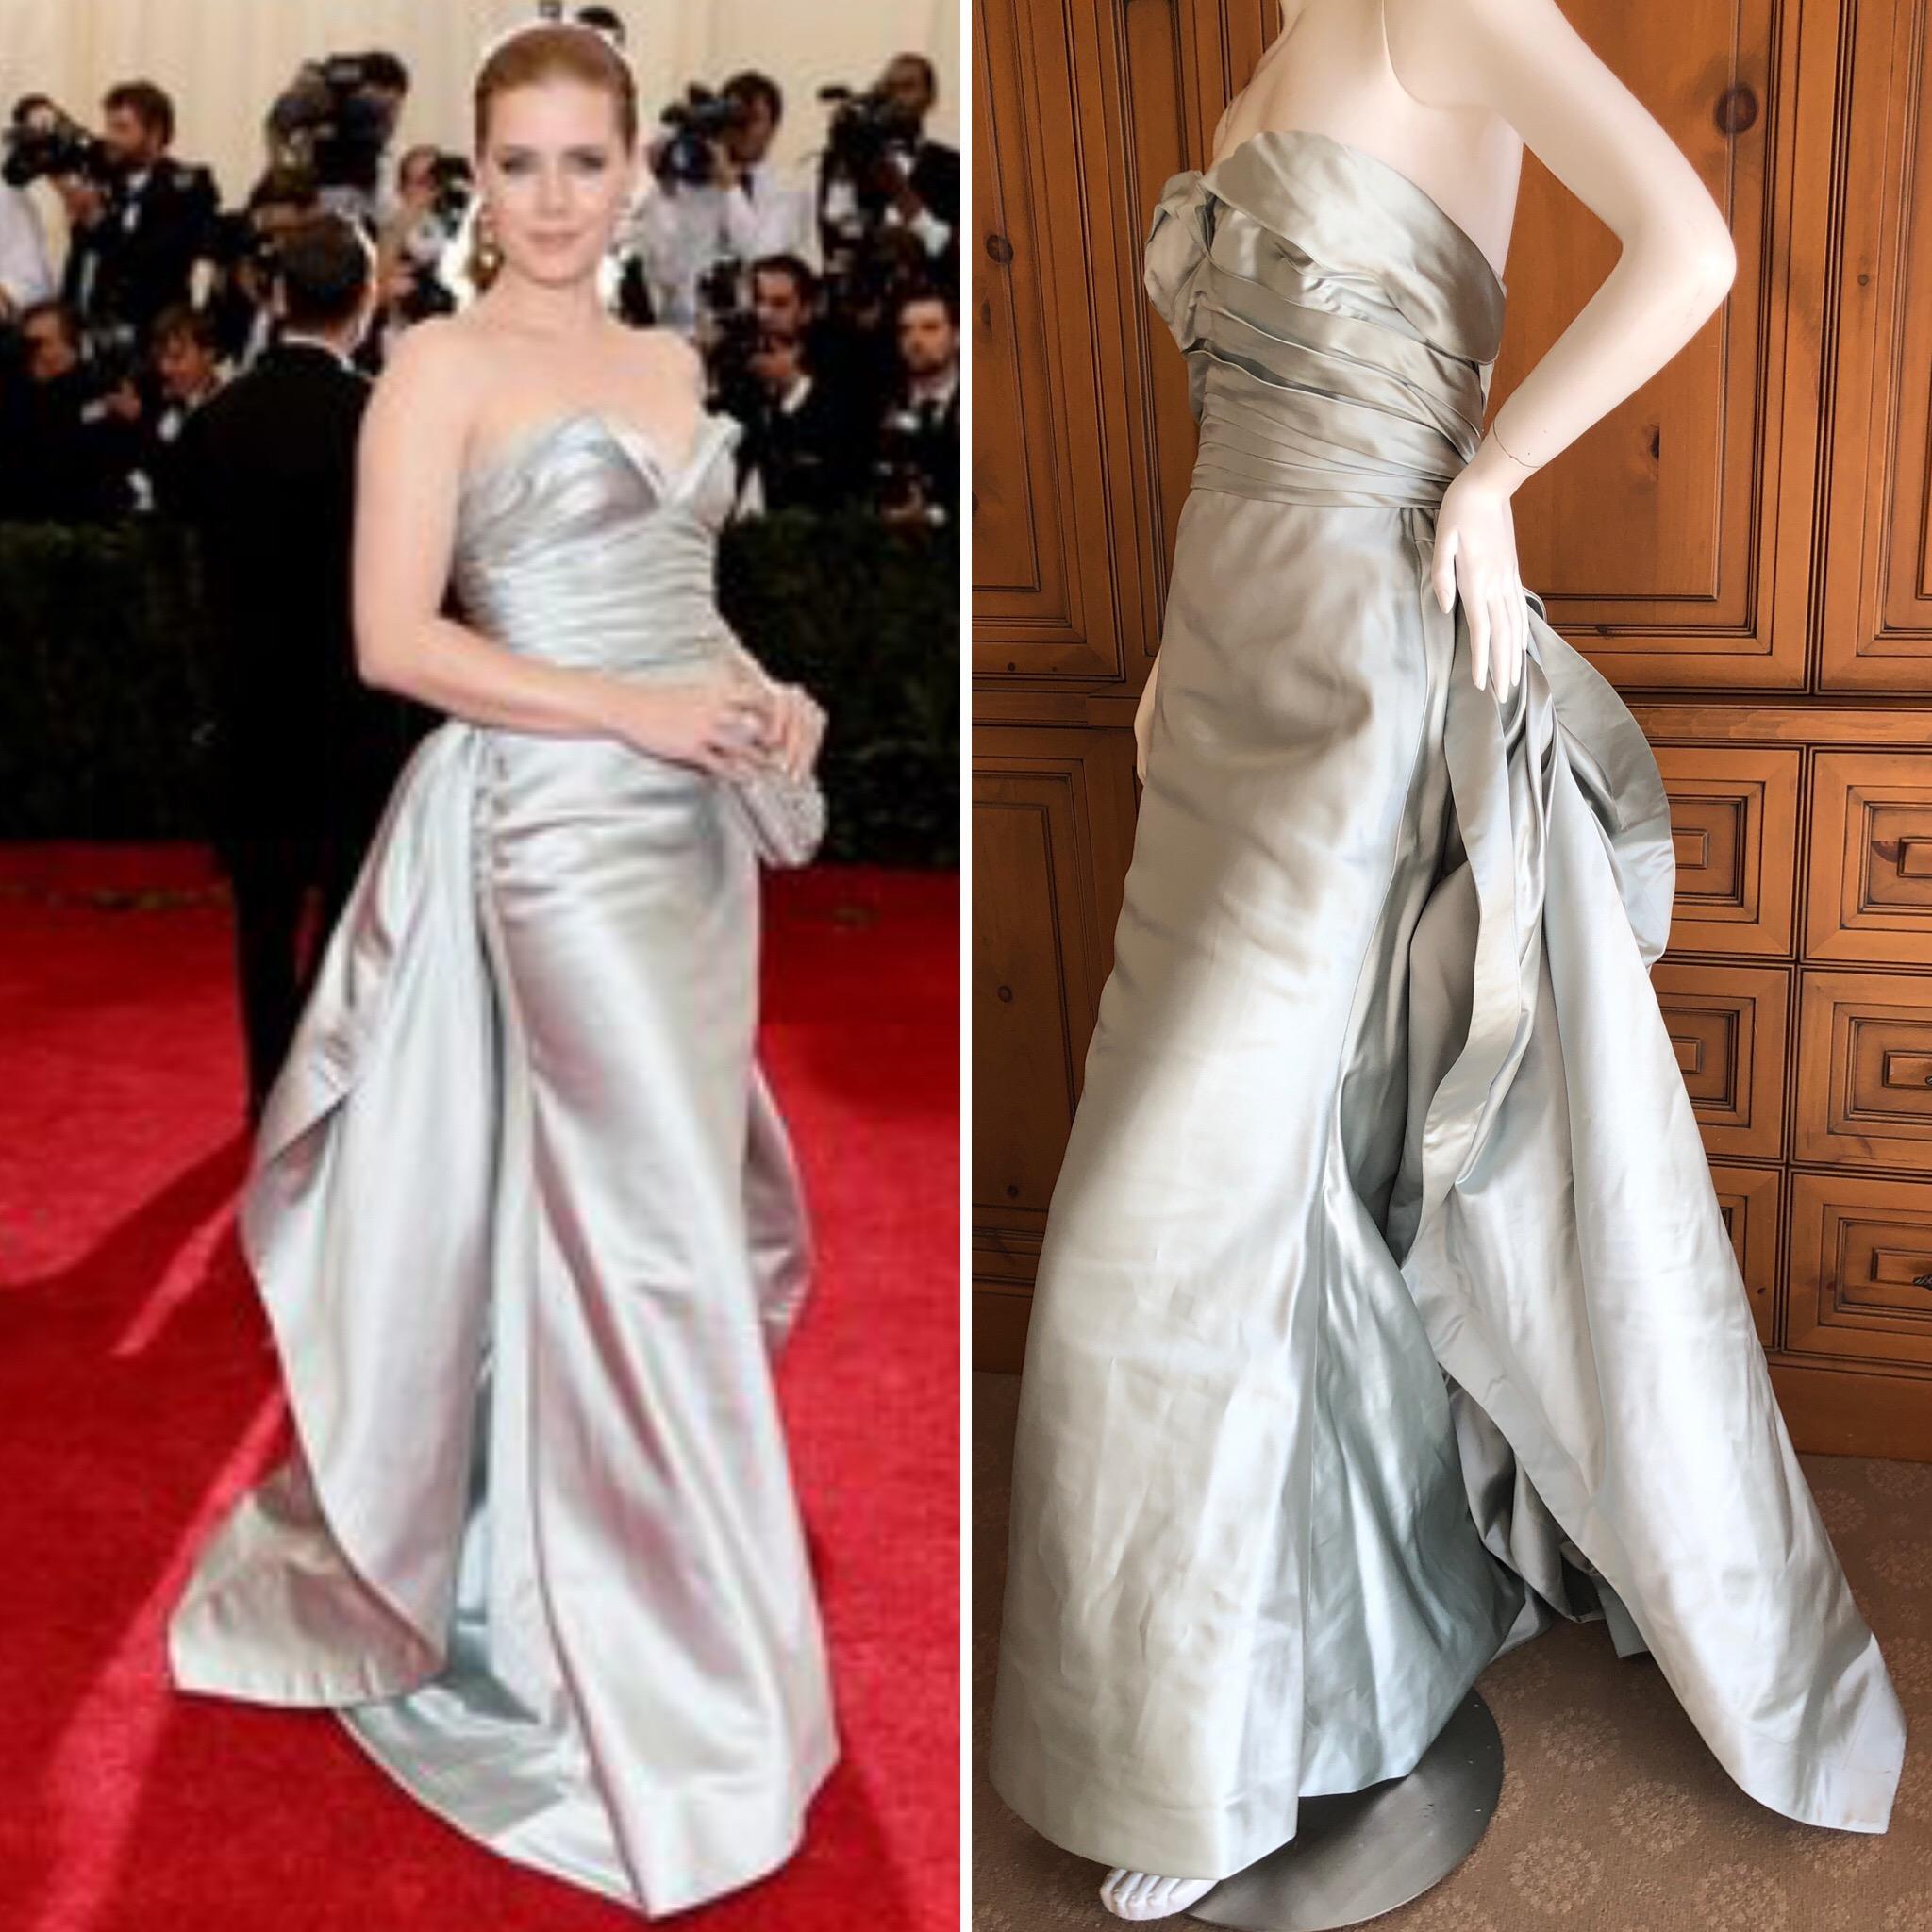 Oscar de la Renta Spectacular 2014 Met Ball Silver Strapless Ballgown.
Worn by Amy Adams to the Met Ball, this is an homage to Charles James , with two winglike trailing train's.
There is an inner bustier.
Simply Stunning. Please use the zoom